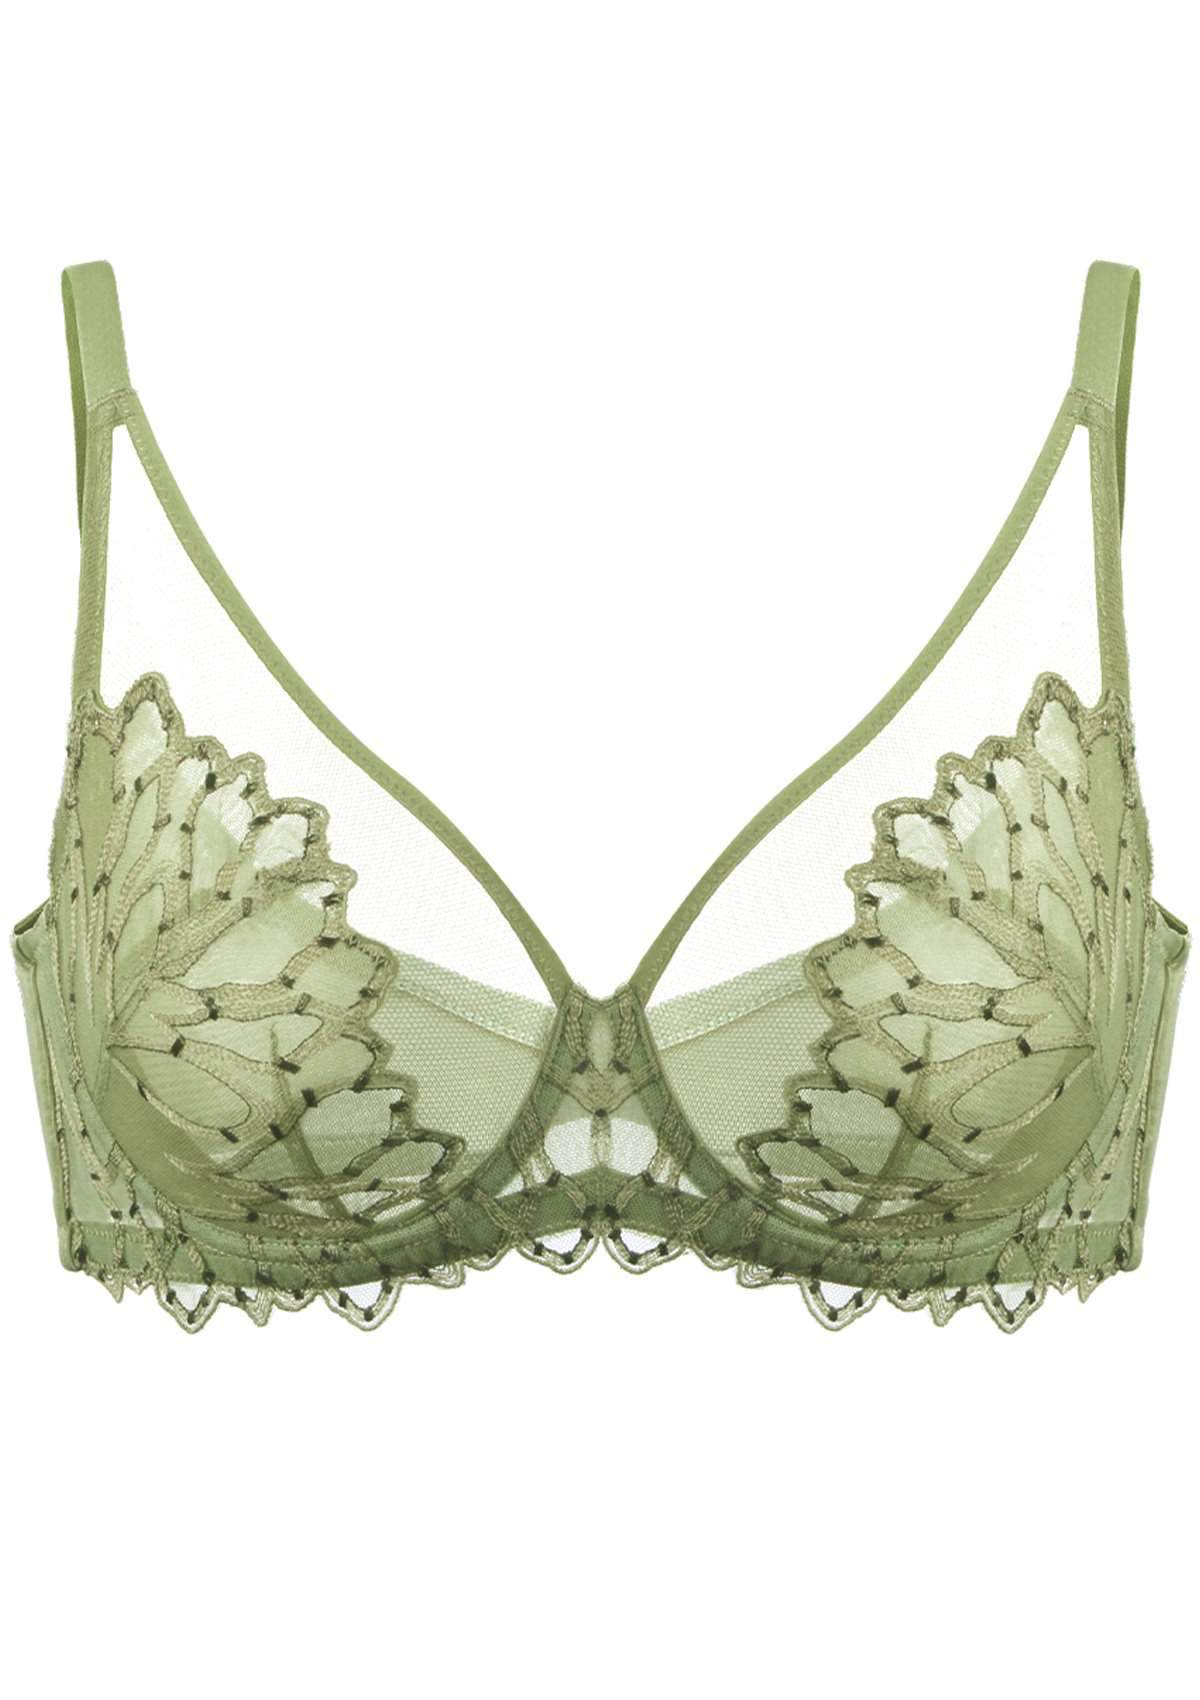 HSIA Chrysanthemum Floral Embroidered Bra: Lace Sheer Unpadded Bra - Green / 34 / DD/E